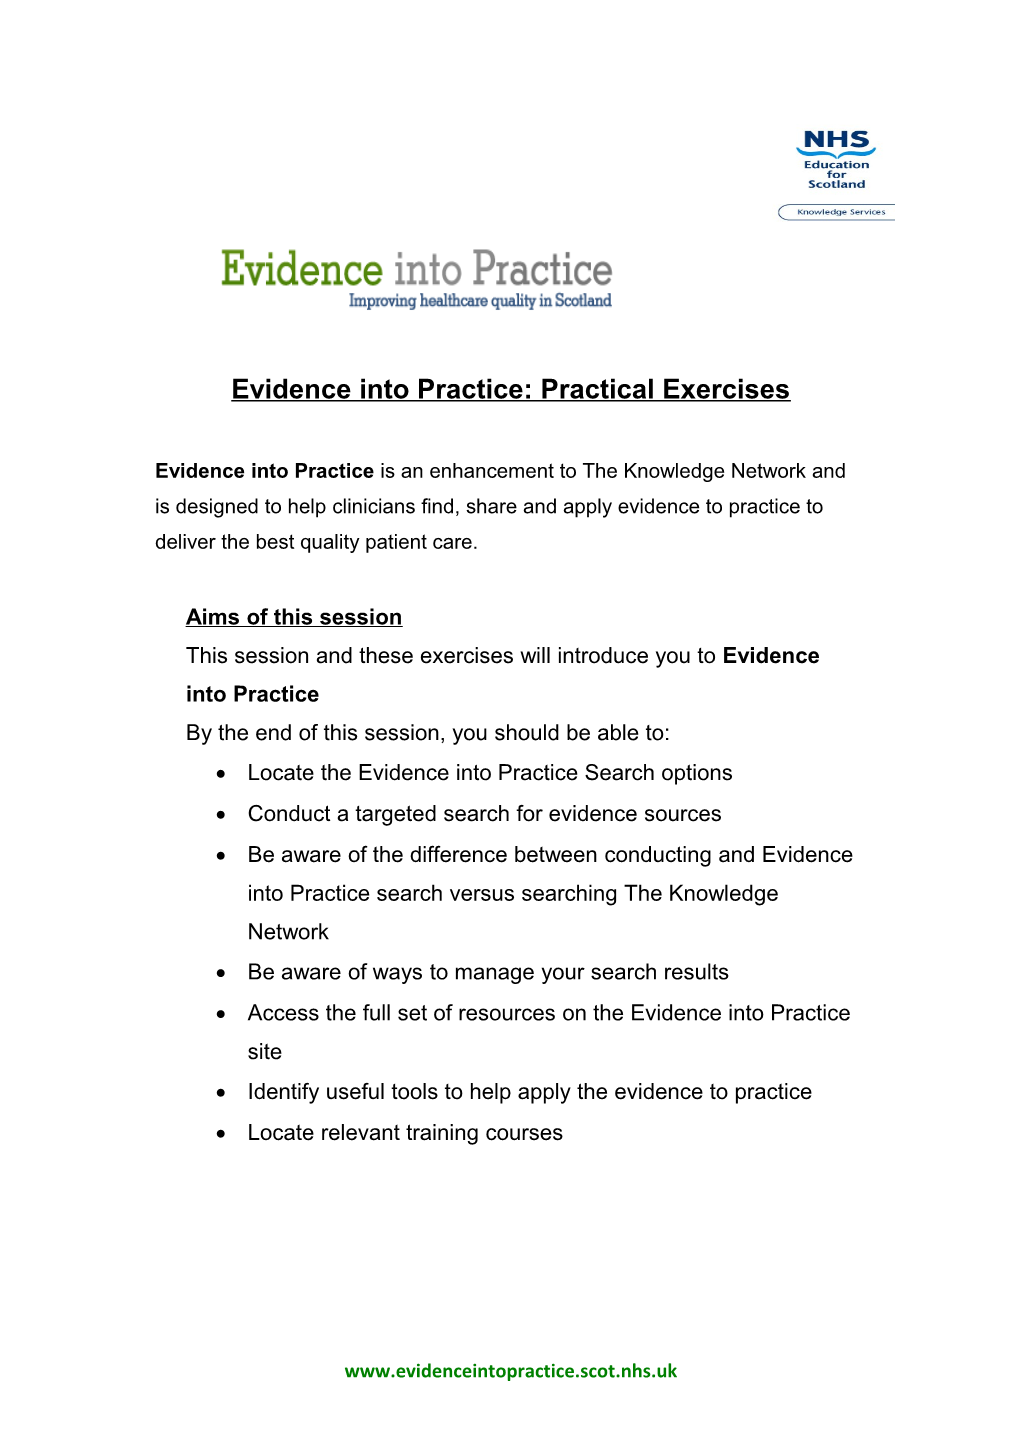 Evidence Into Practice: Practical Exercises